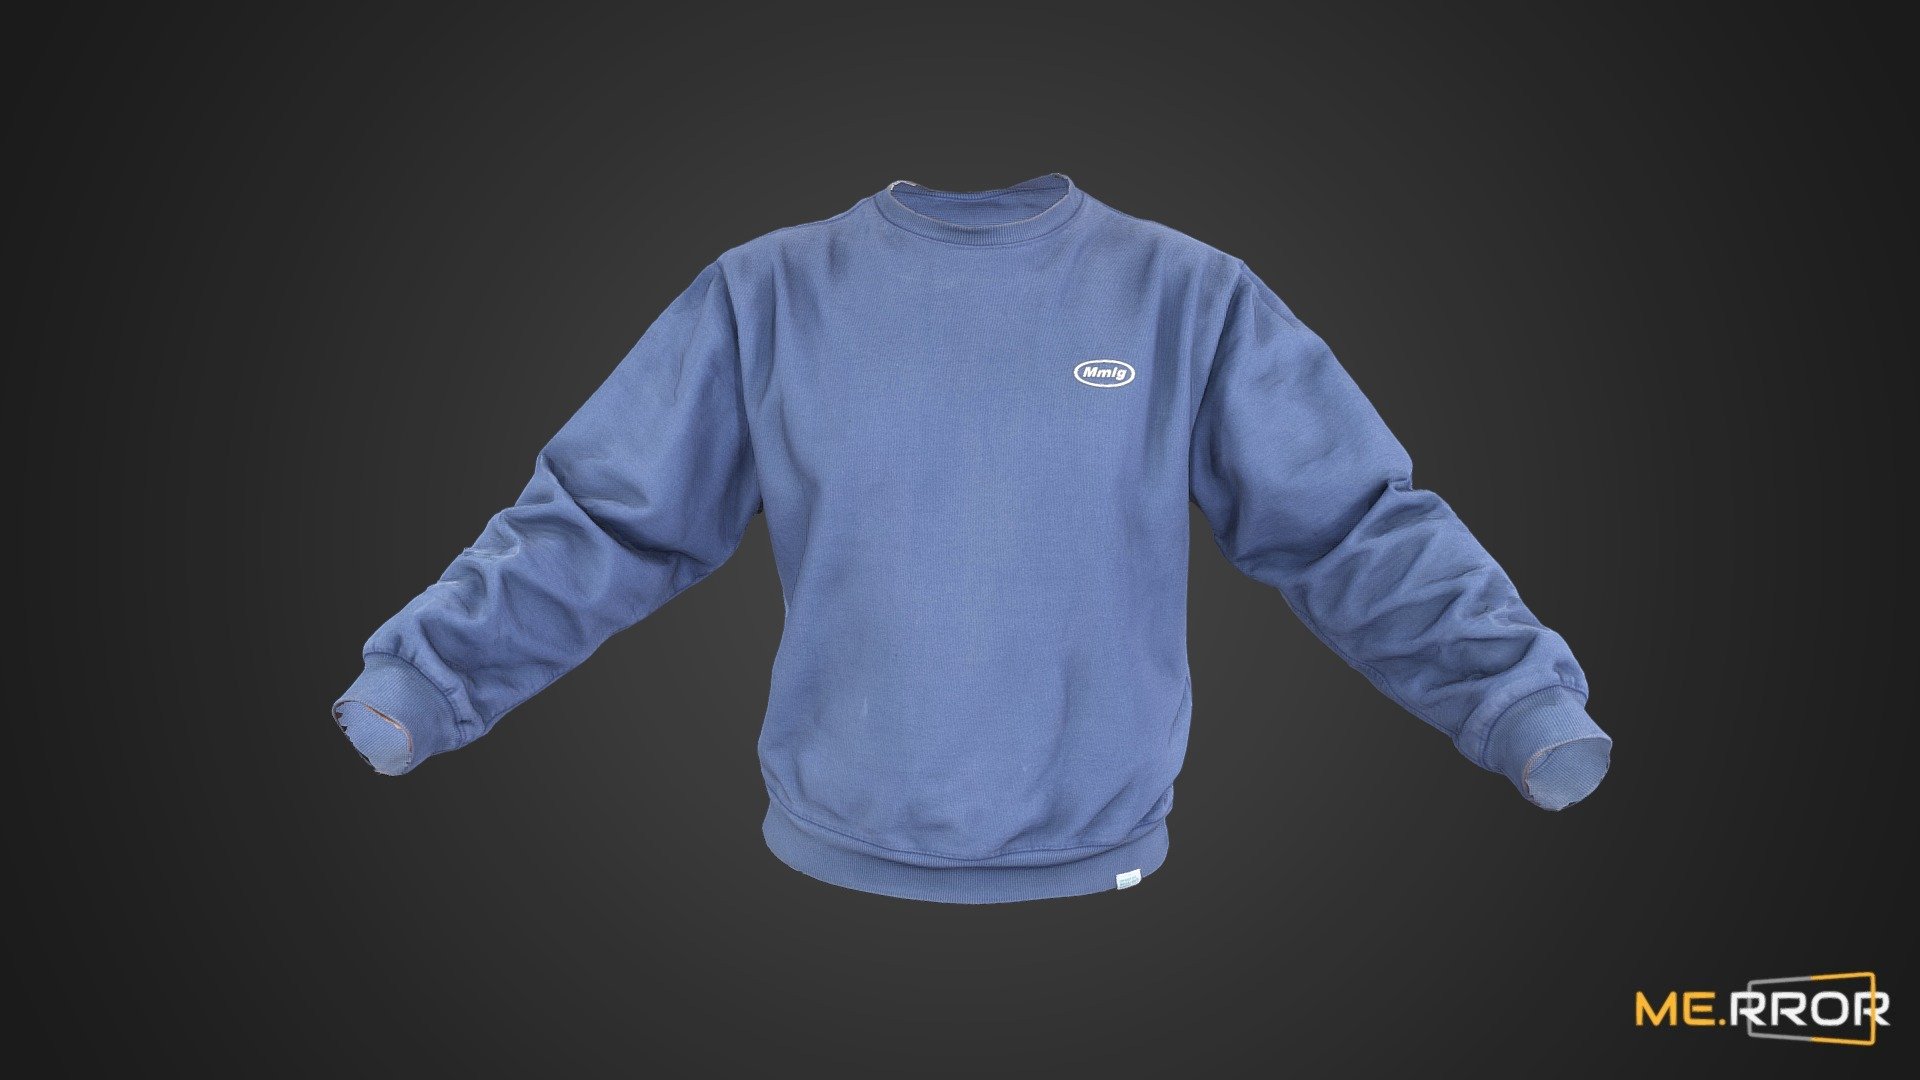 MERROR is a 3D Content PLATFORM which introduces various Asian assets to the 3D world


3DScanning #Photogrametry #ME.RROR - Indigo Blue Sweatshirts - Buy Royalty Free 3D model by ME.RROR Studio (@merror) 3d model